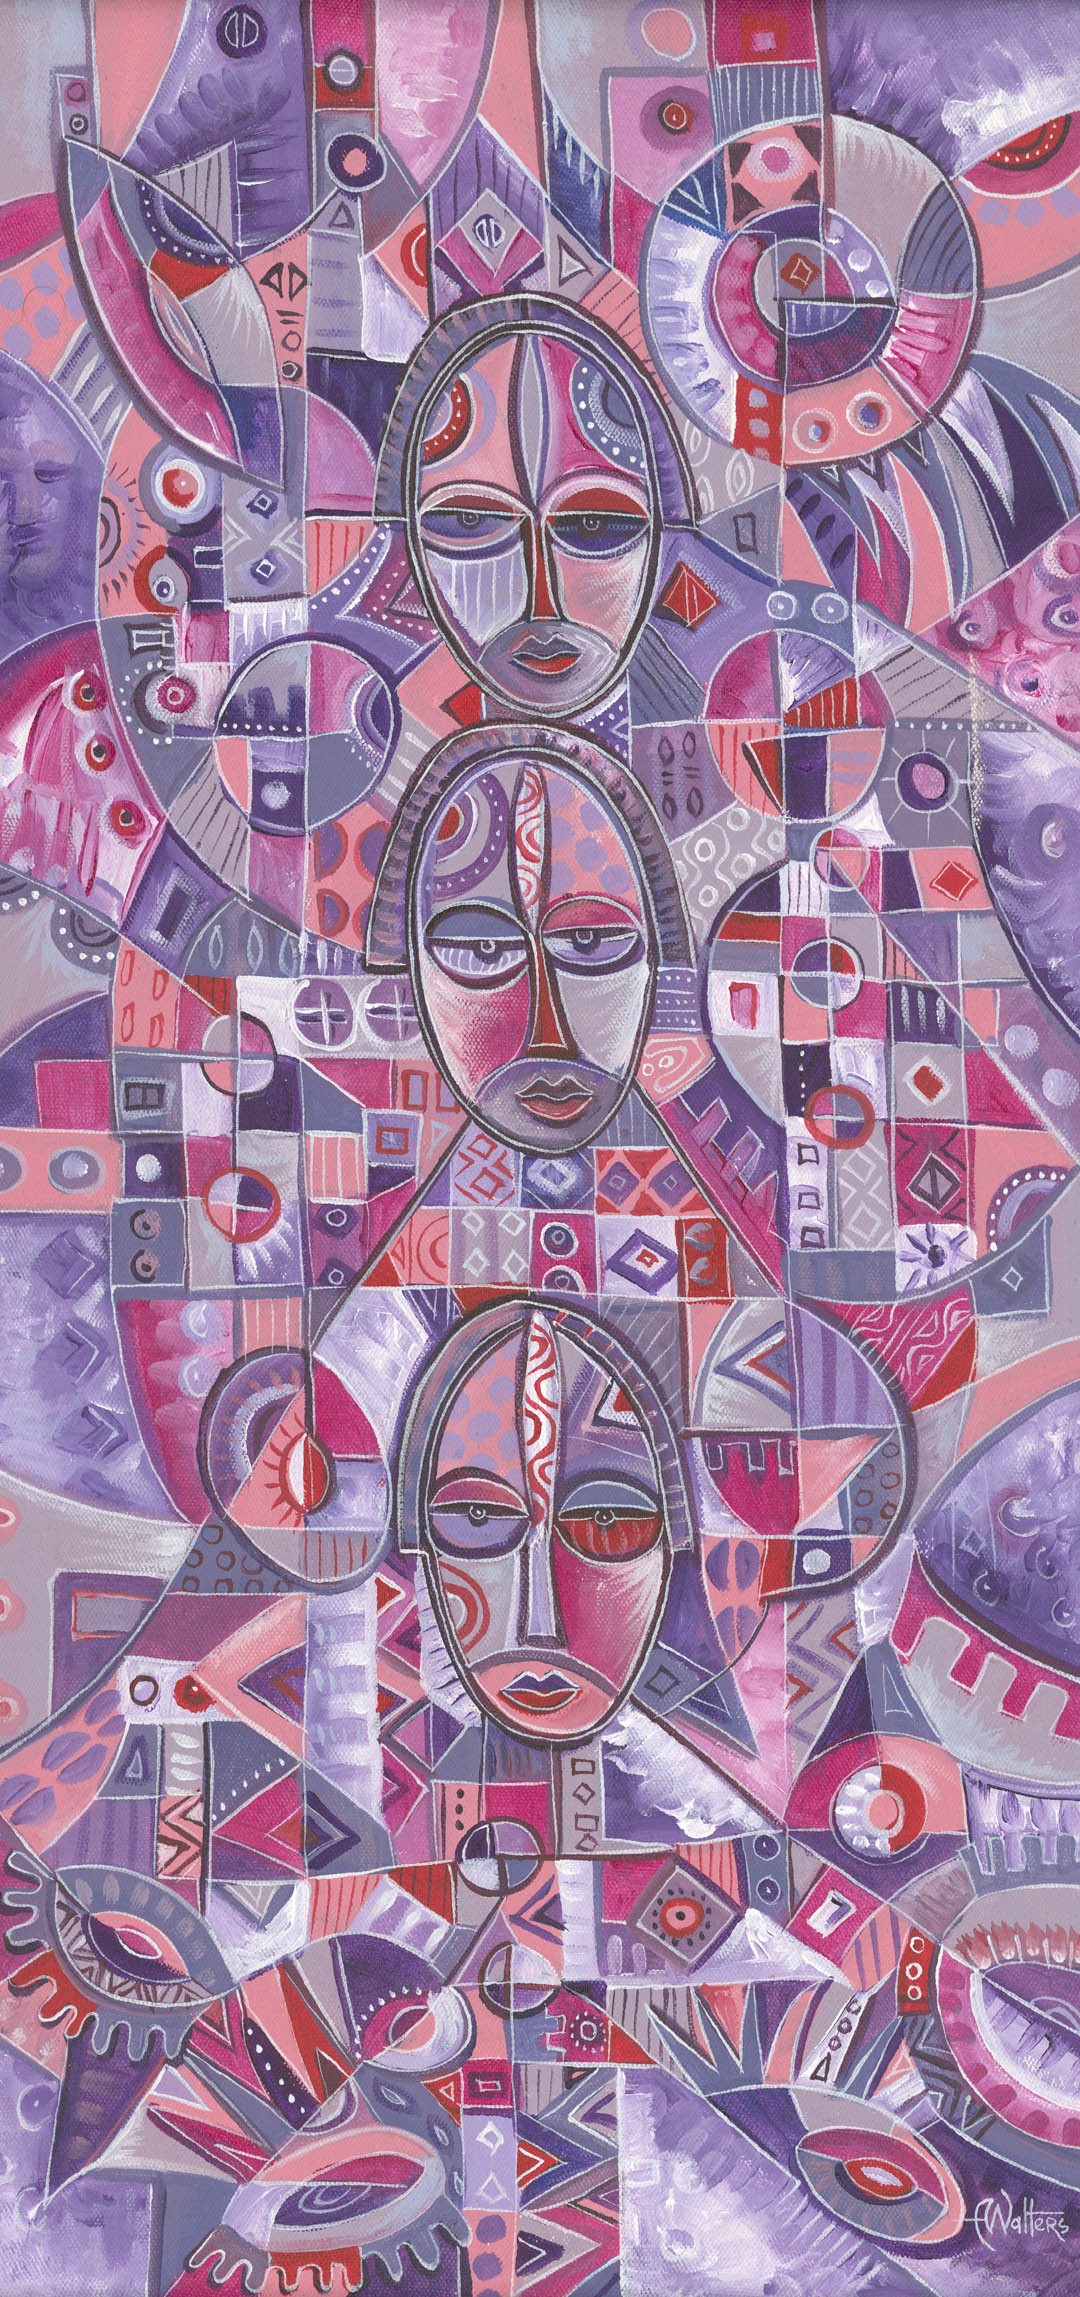 In this bright pink, violet, and purple original acrylic painting the artist has painted faces of three women atop one another.